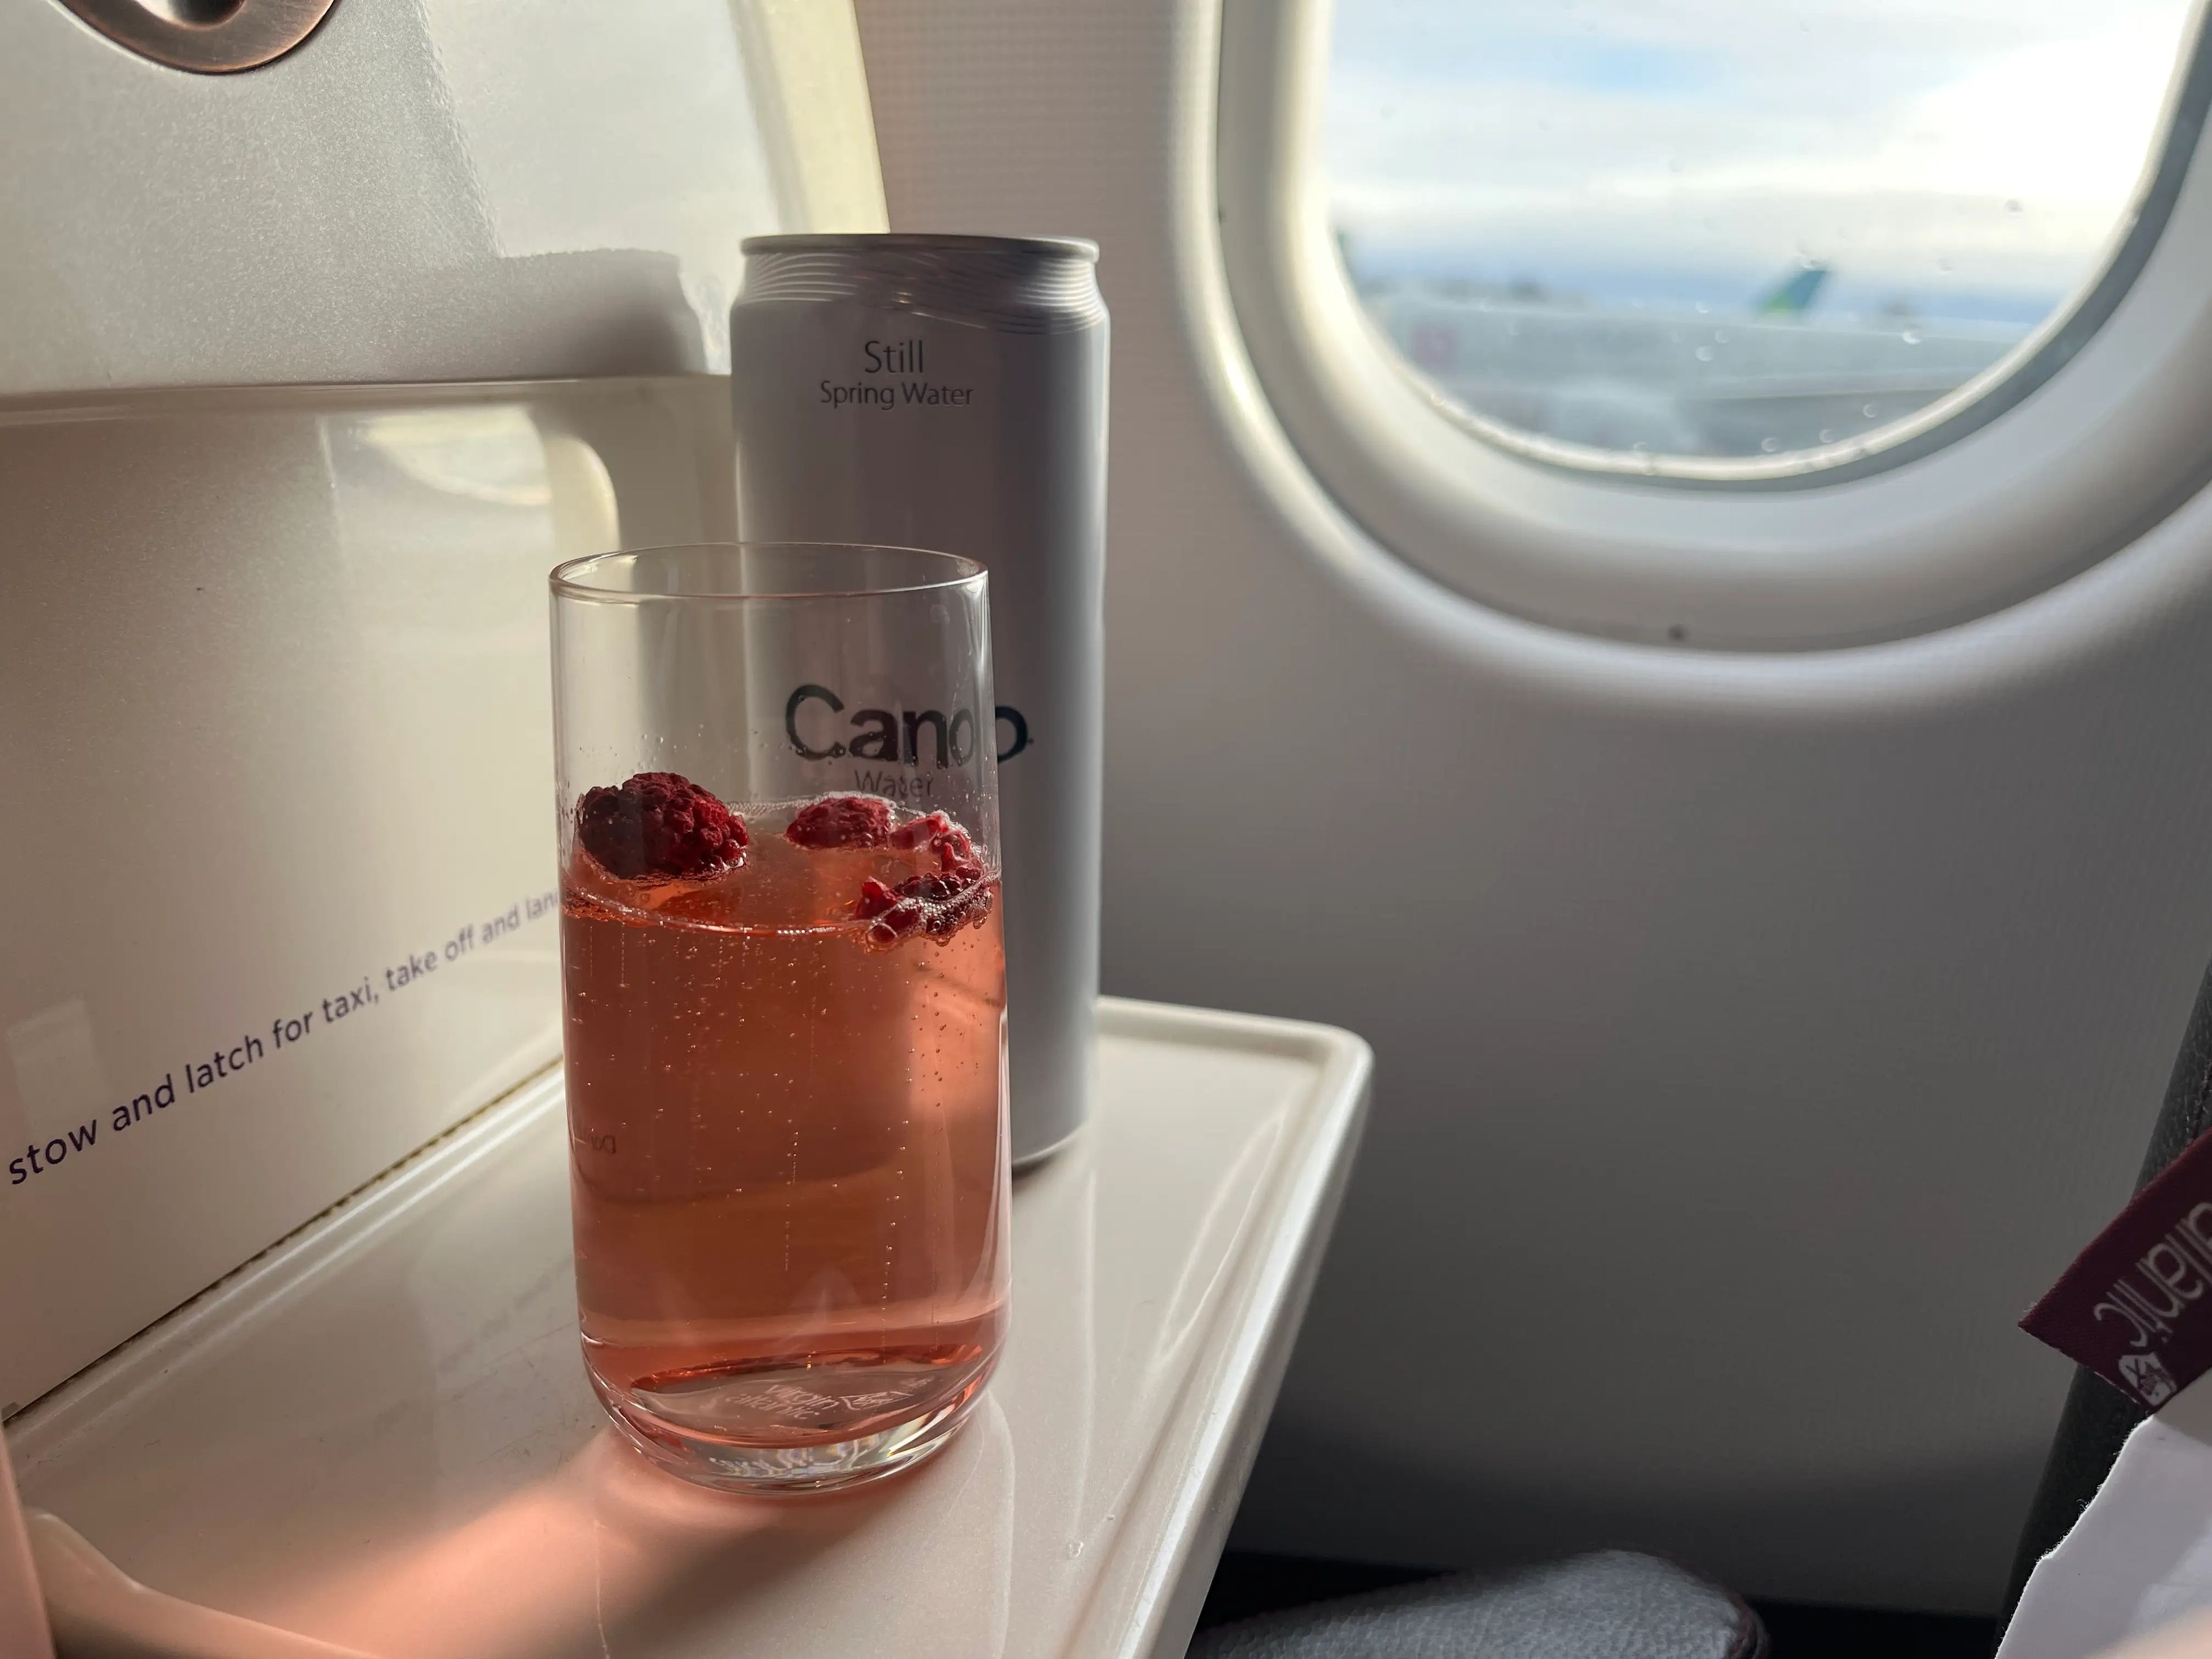 A red-orange cocktail with sparkling wine and raspberries floating at the top alongside a gray can of spring water on a tray on an airplane with window in background